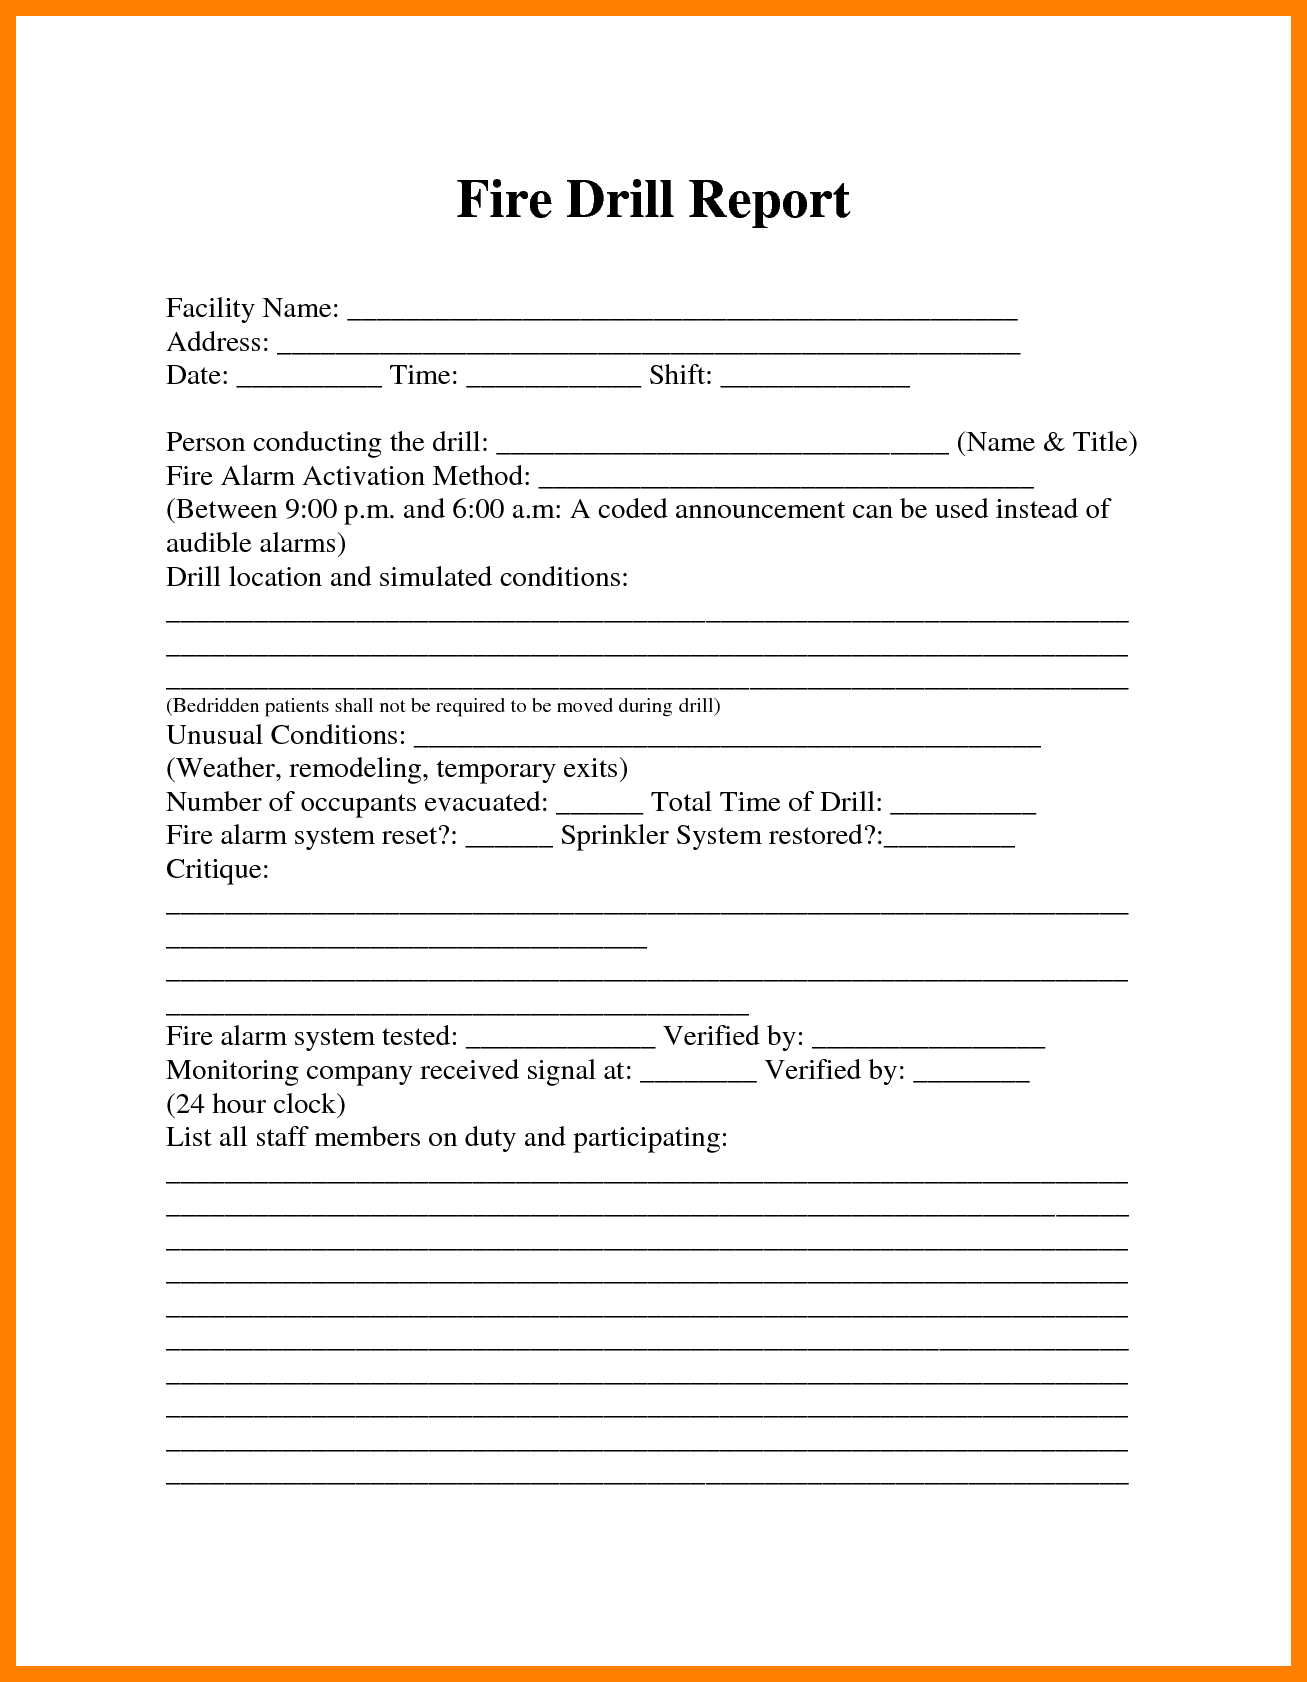 Image Result For Fire Drill Procedures For Summer Camp Regarding